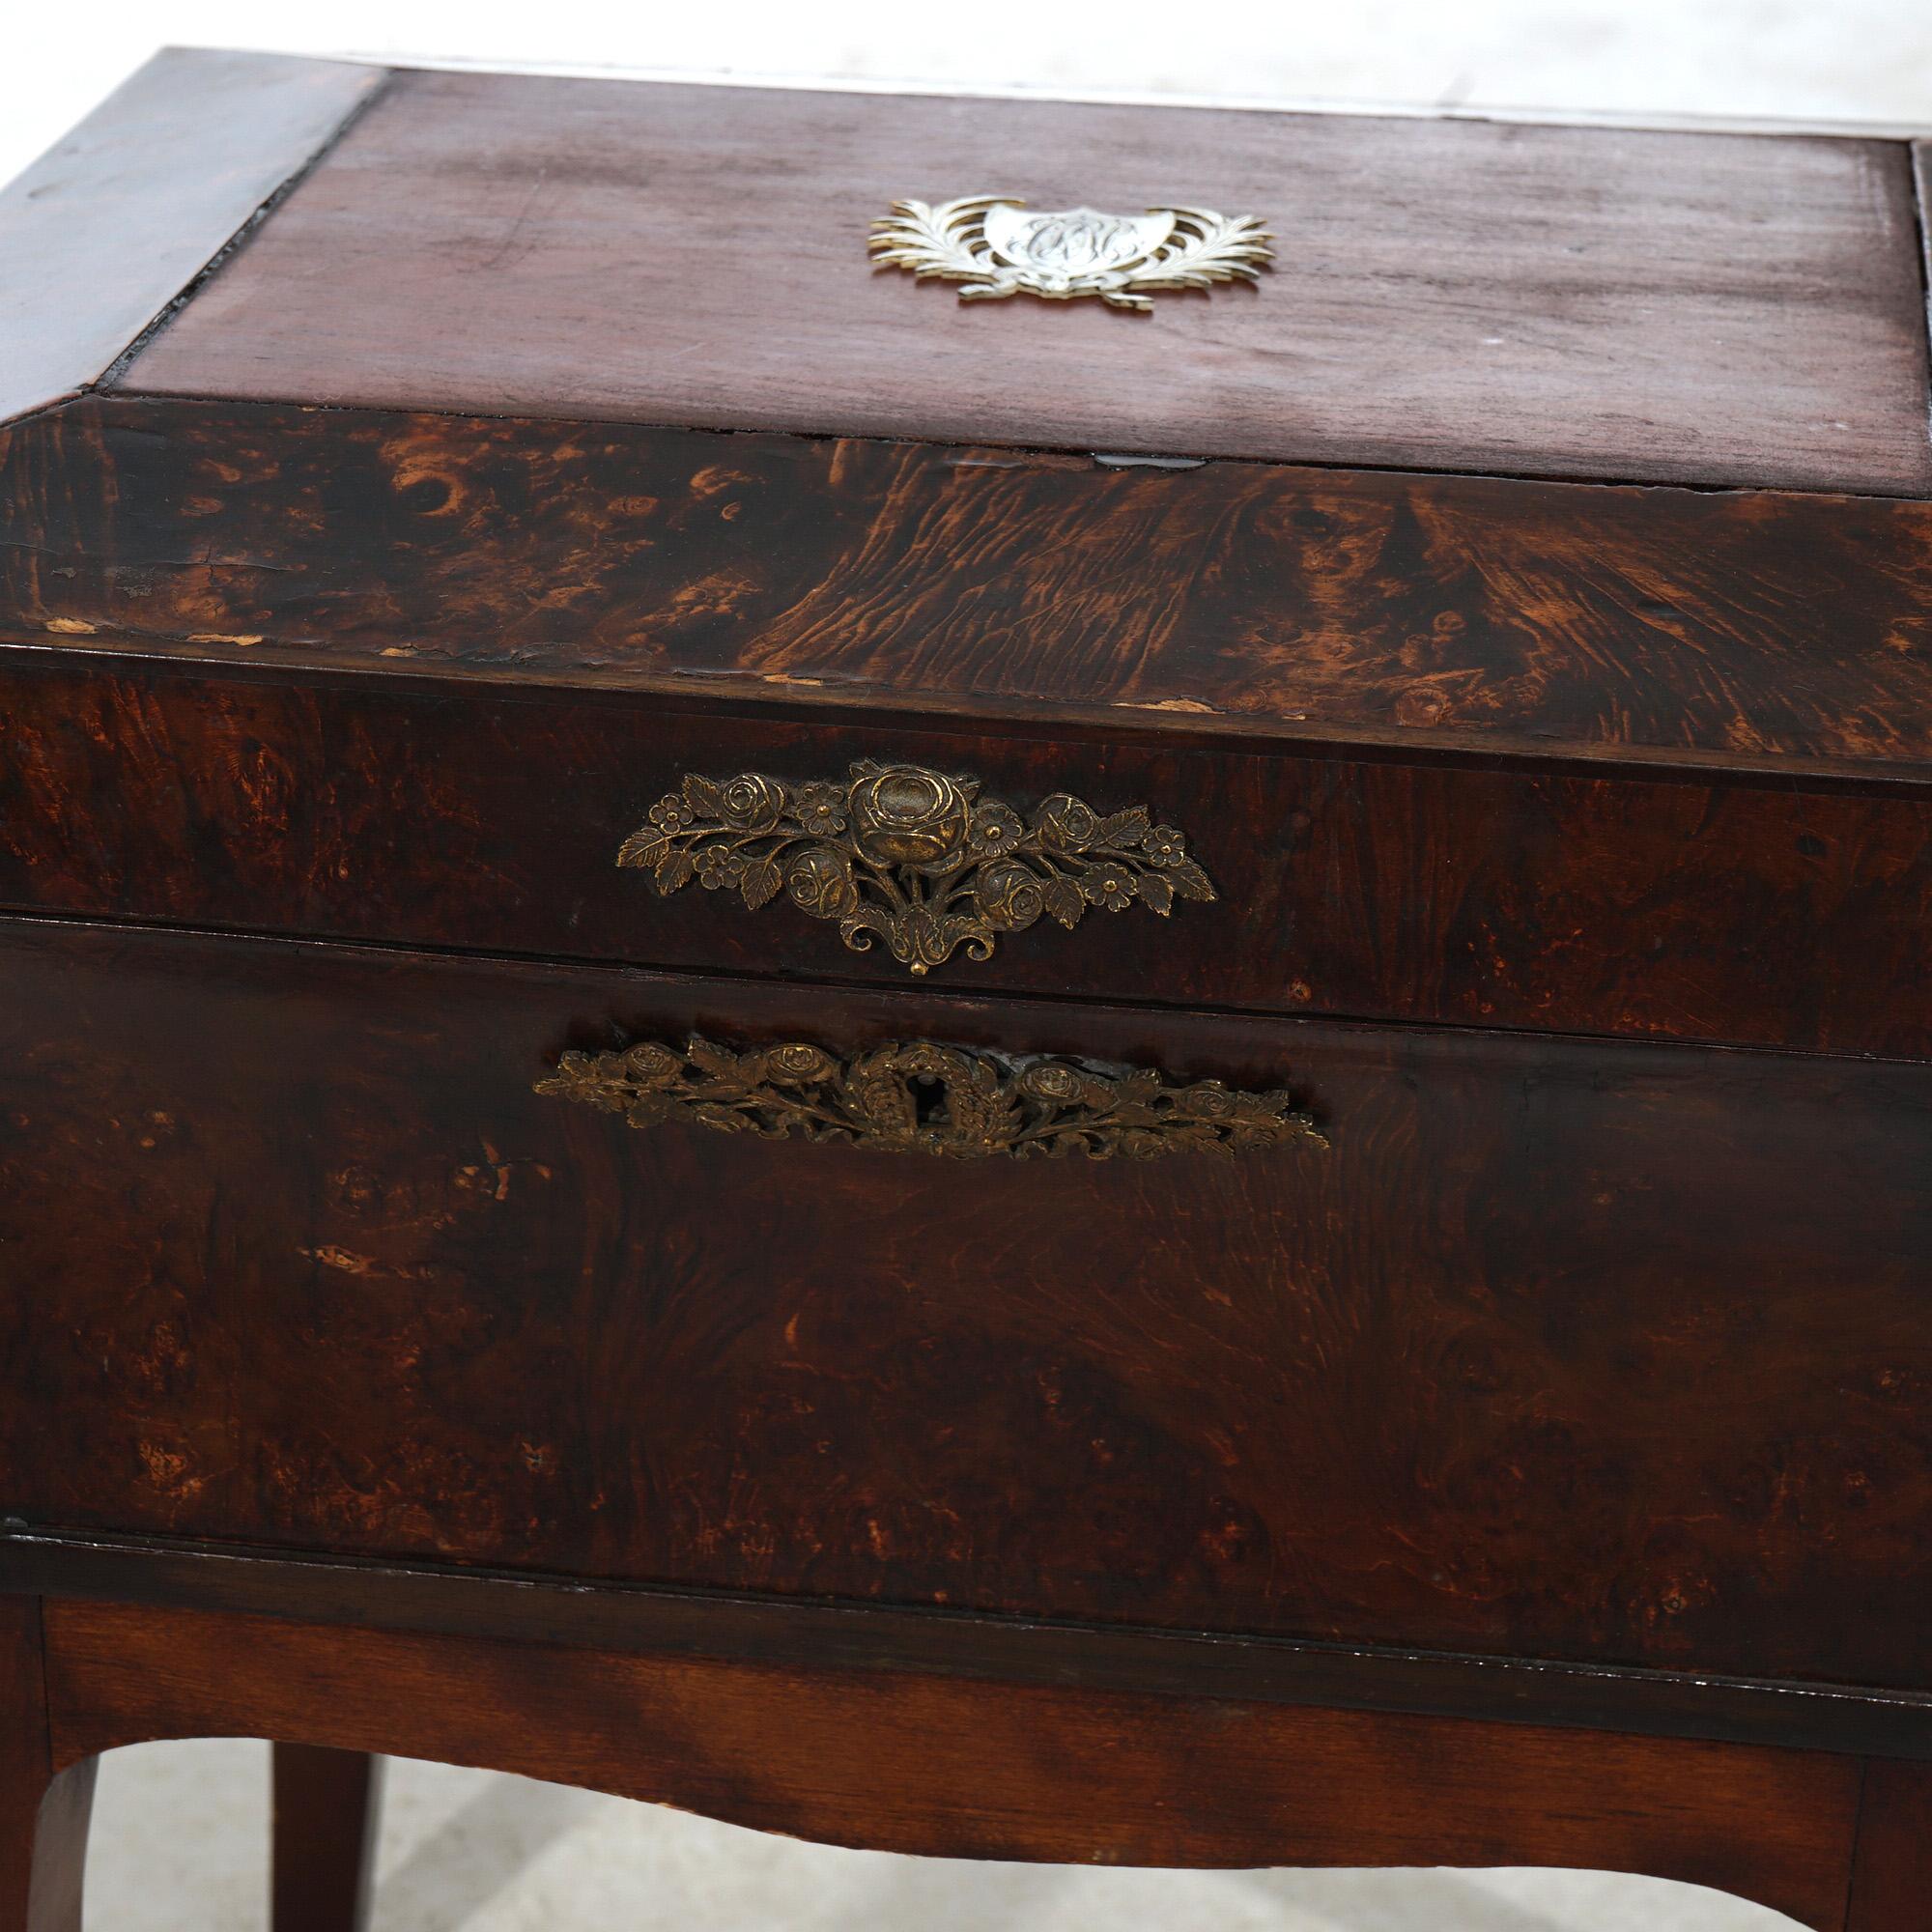 Antique French Louis XVI Inlaid Olive Wood Sewing Box or Jewel Chest c1800 3